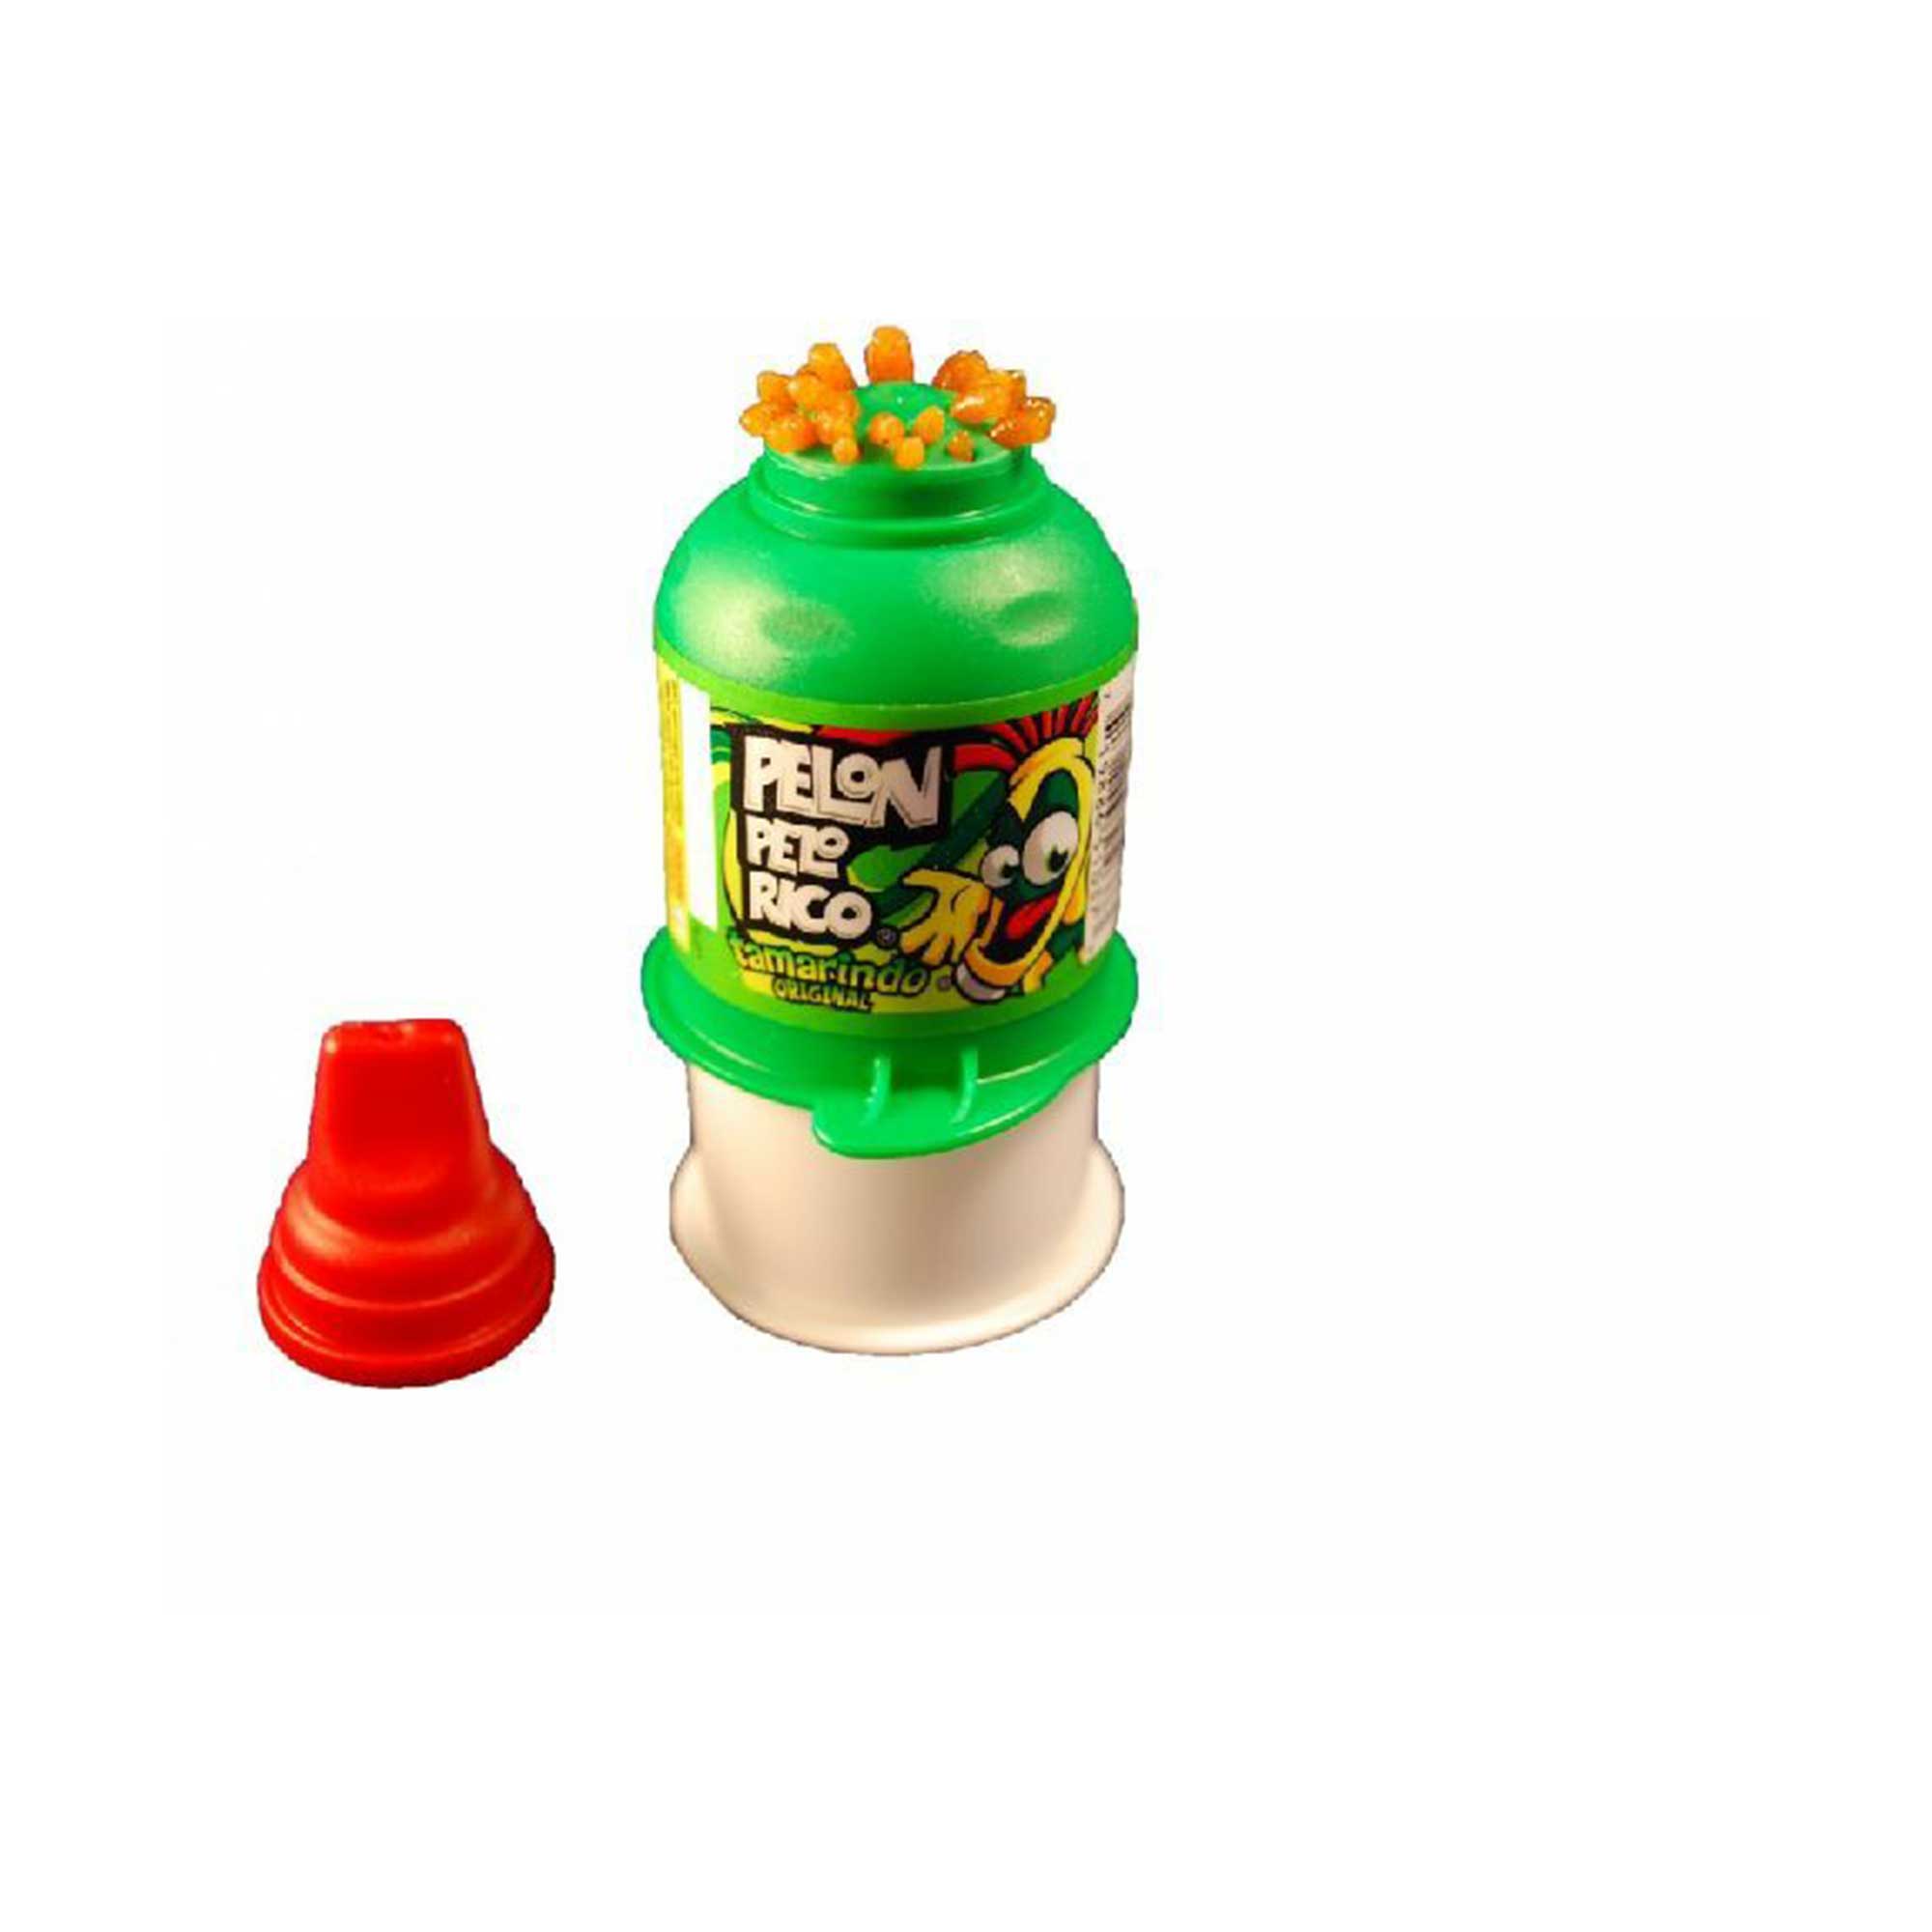 Pelon Pelonazo Big Mexican Candy 4ct - Extra Large Mexican Candy